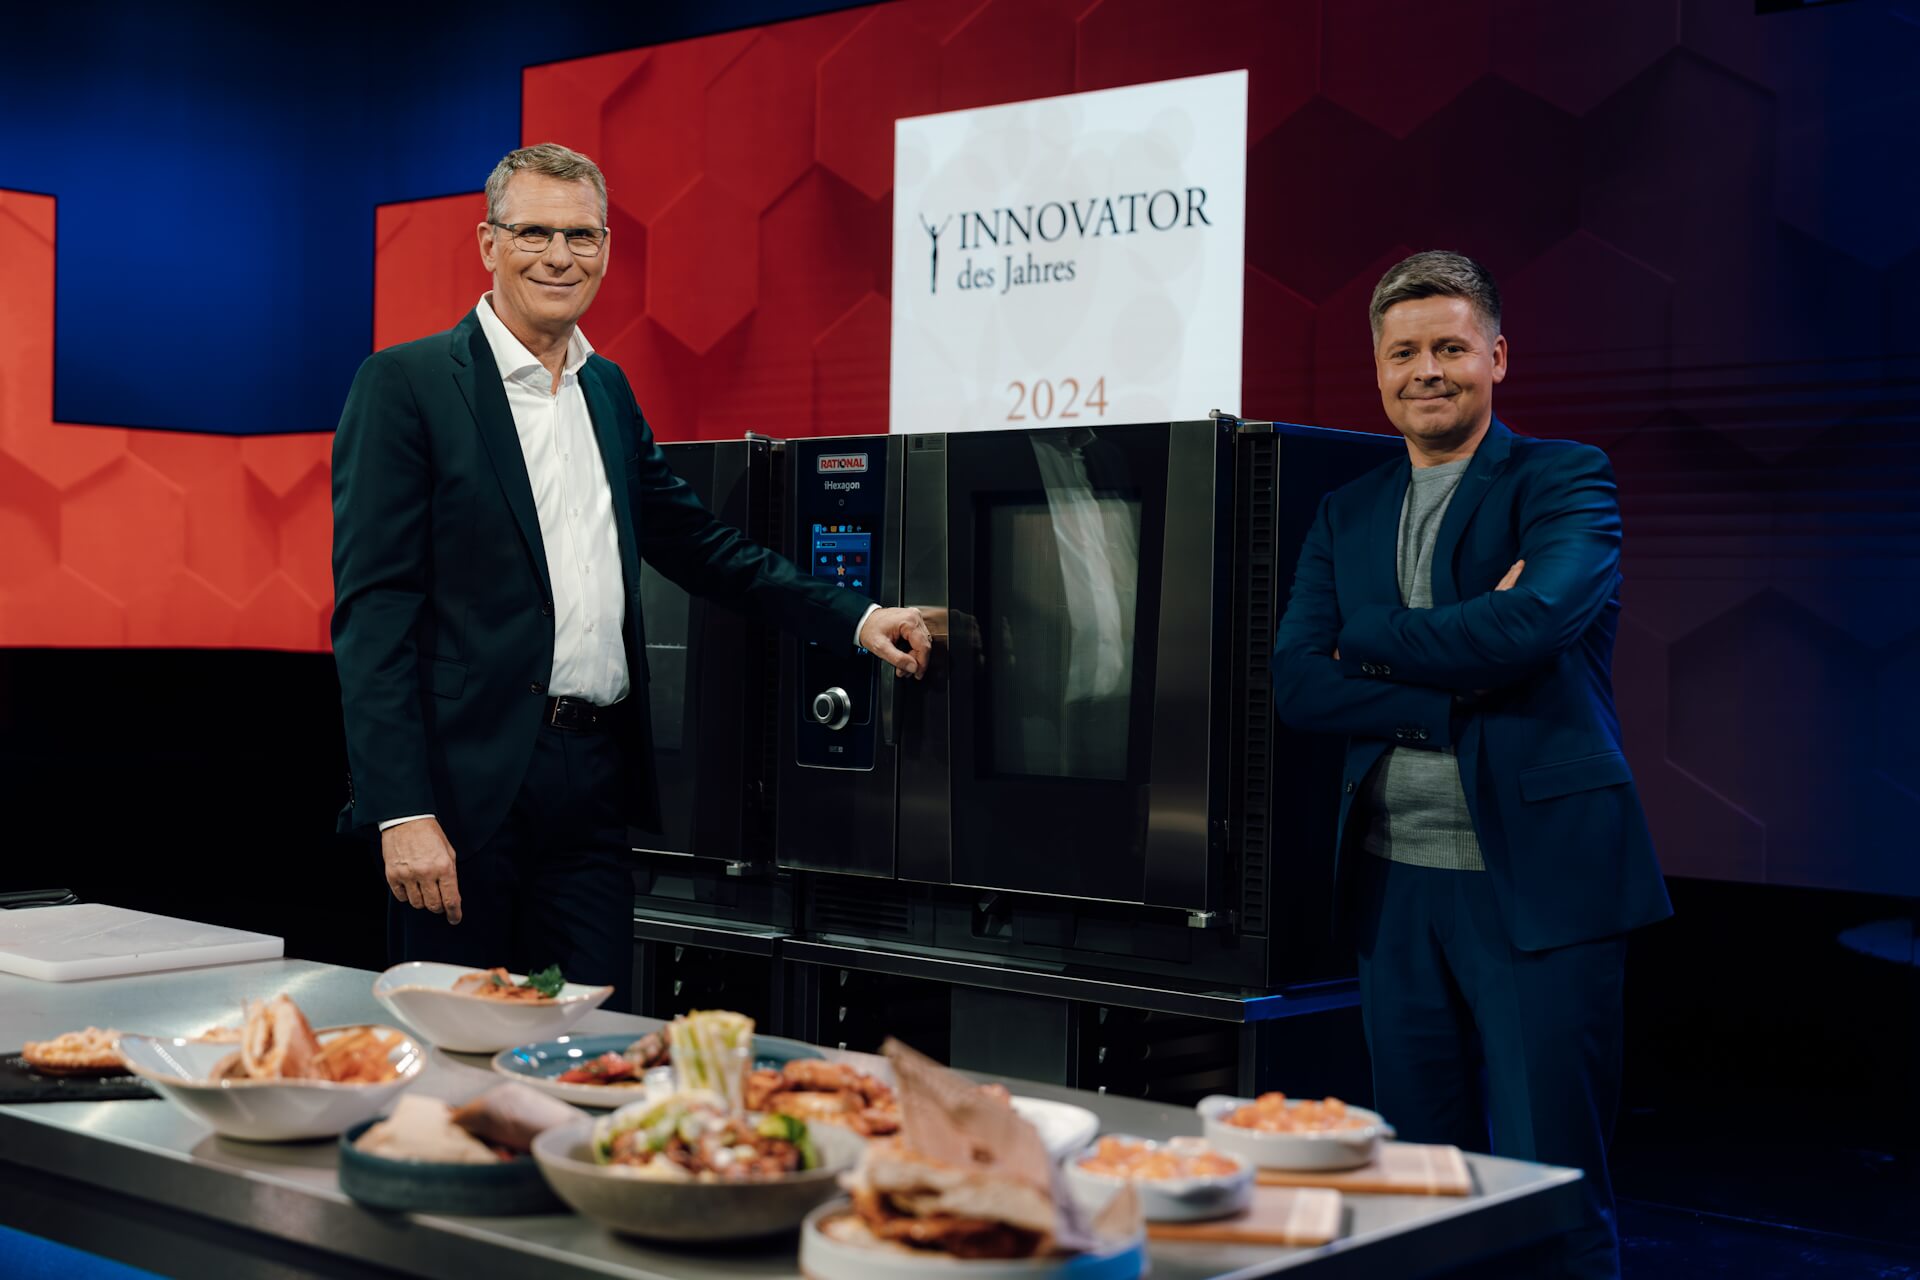 Rational introduces its new innovative product category the iHexagon